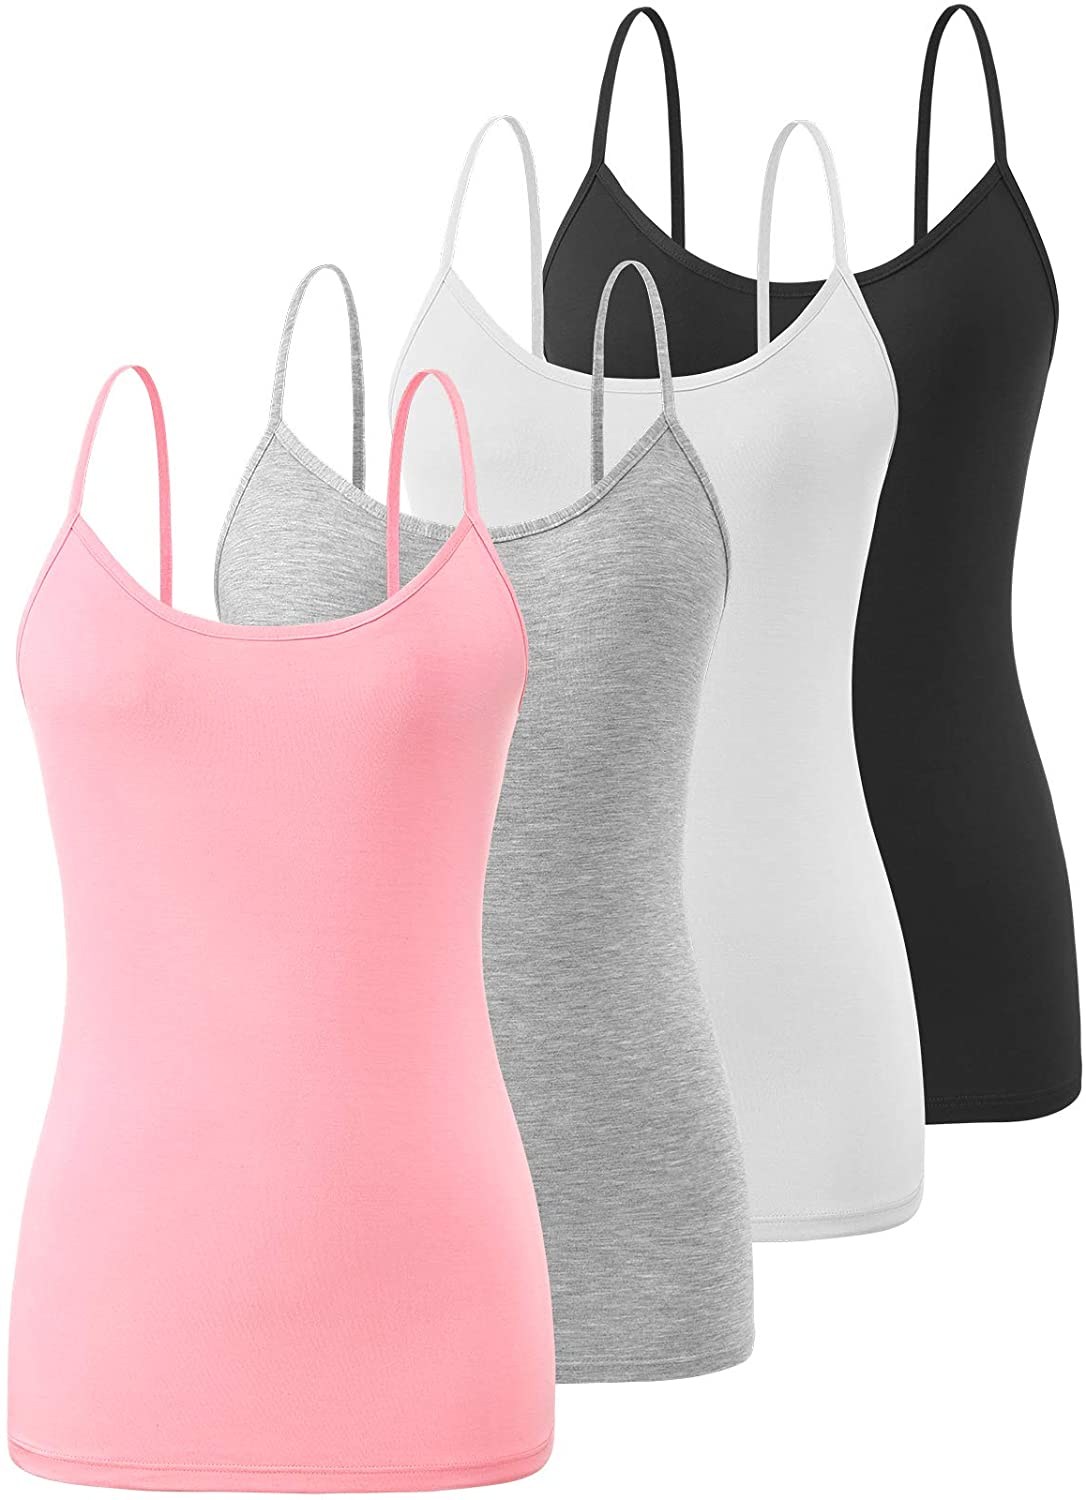 Air Curvey 4 Piece Camisoles for Women Basic Camis Undershirt Adjustable  Spaghetti Strap Tank Top